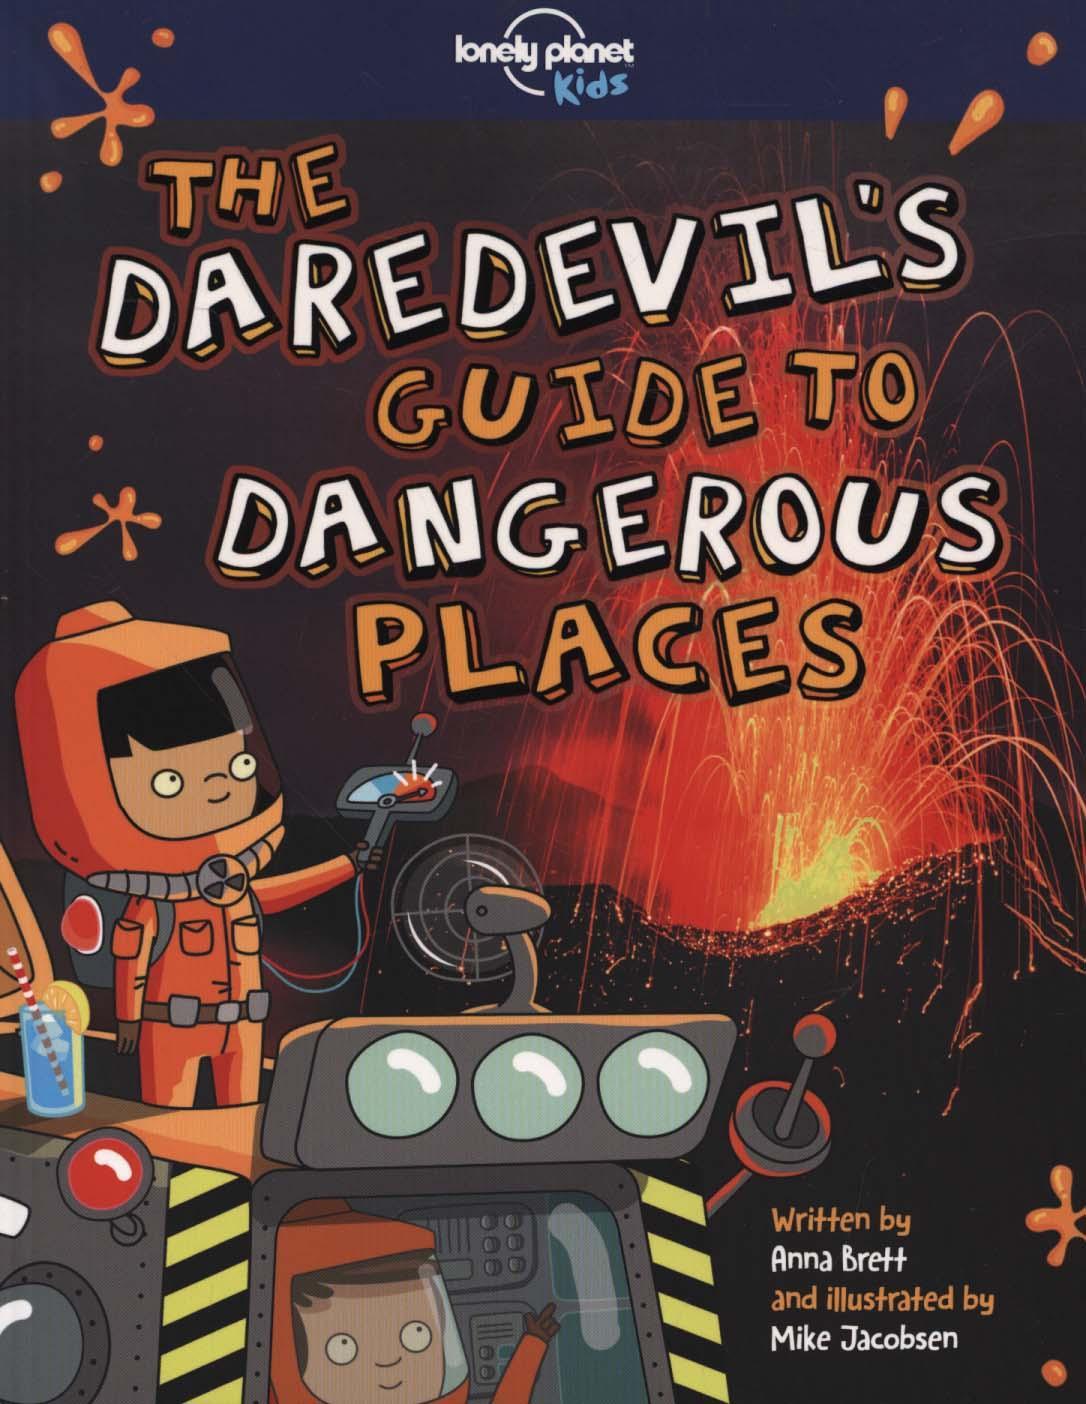 Daredevil's Guide to Dangerous Places